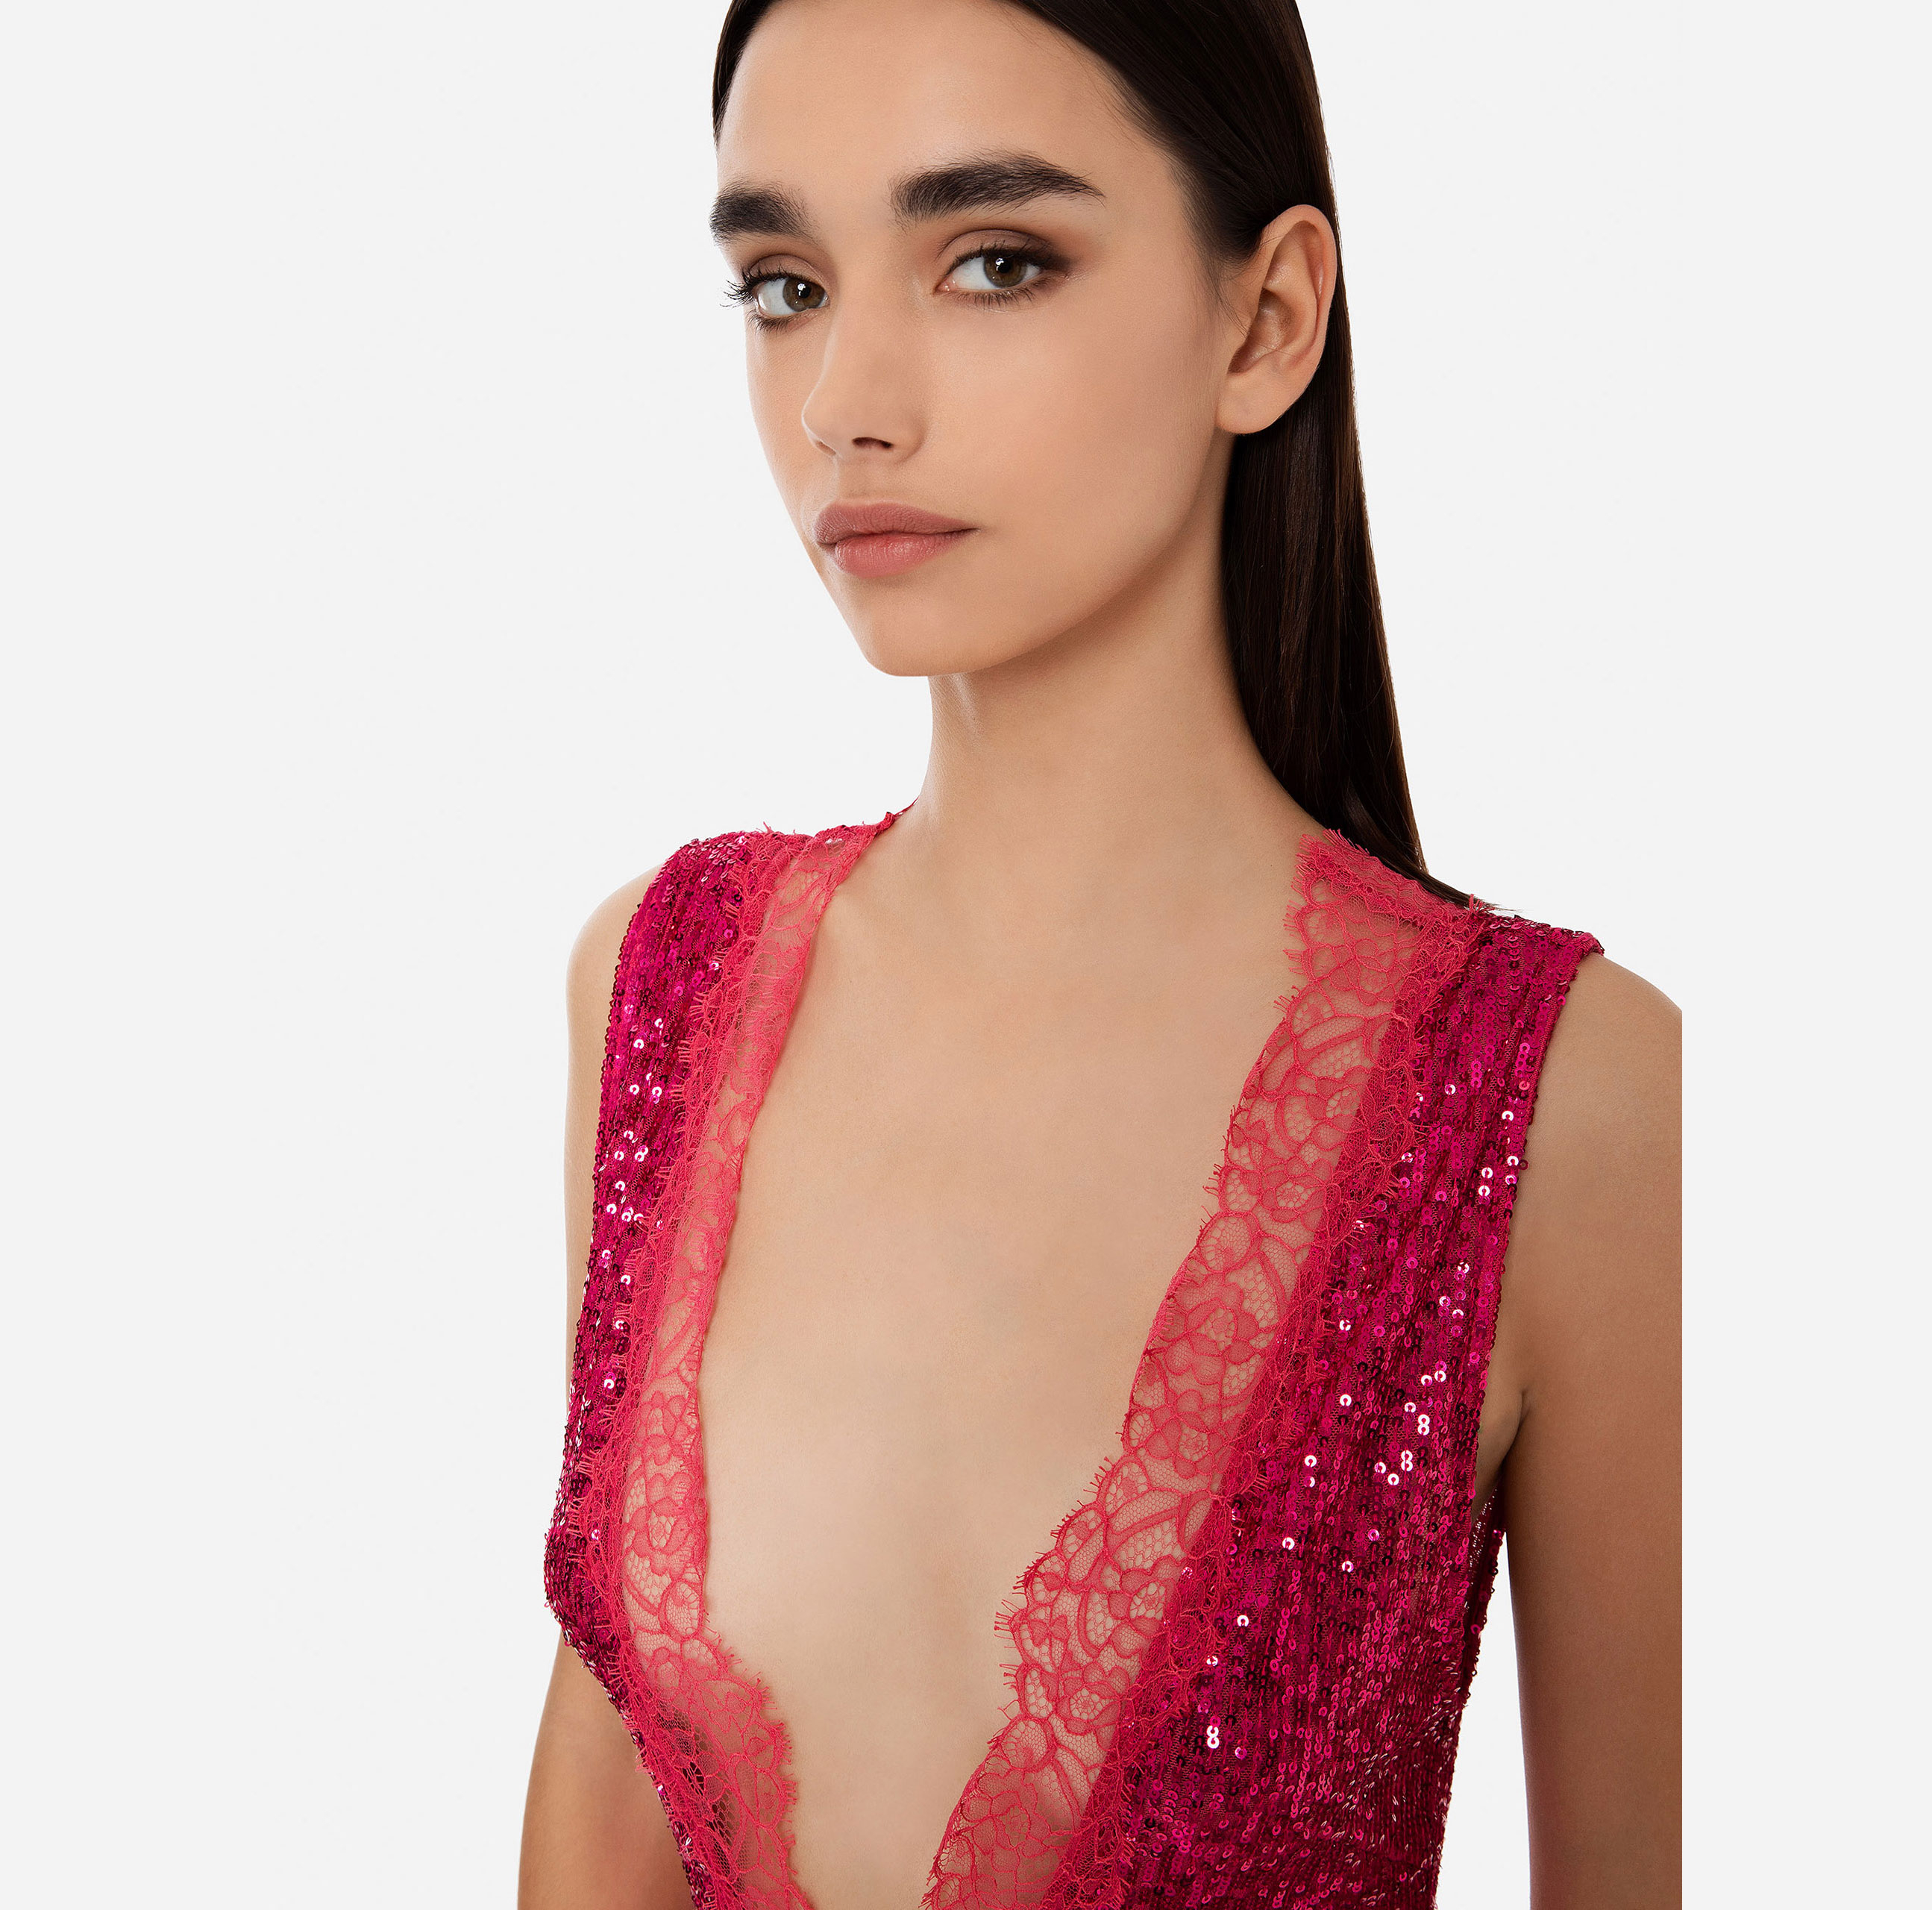 Red carpet dress with inserts in lace and sequin fabric - Elisabetta Franchi